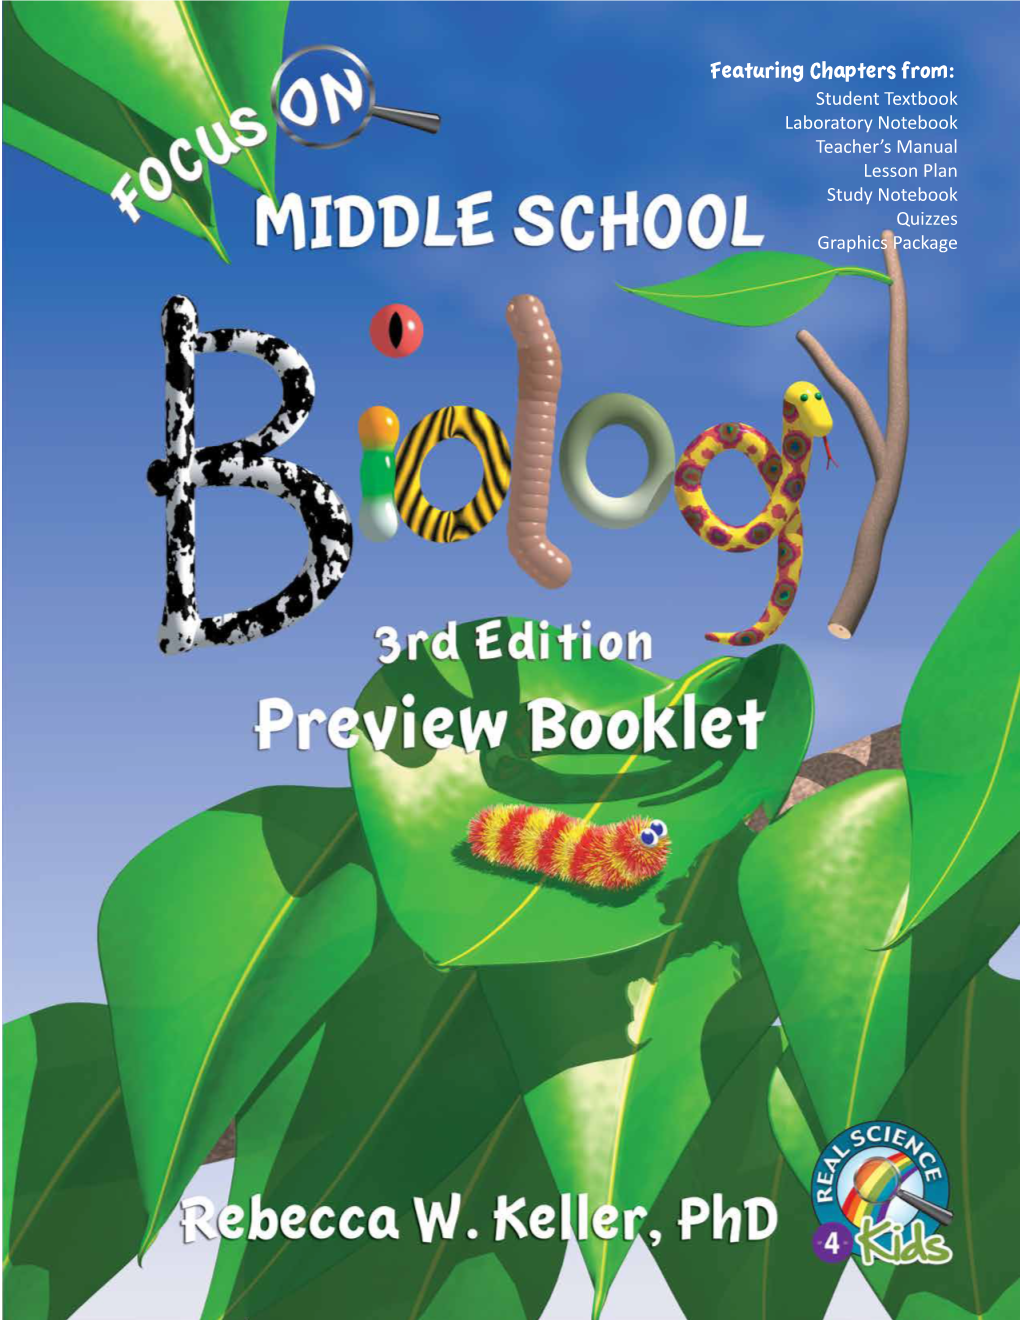 Biology 3Rd Edition Preview Booklet Where You Can Take Our One Semester Unit Study Program for a Test Run!